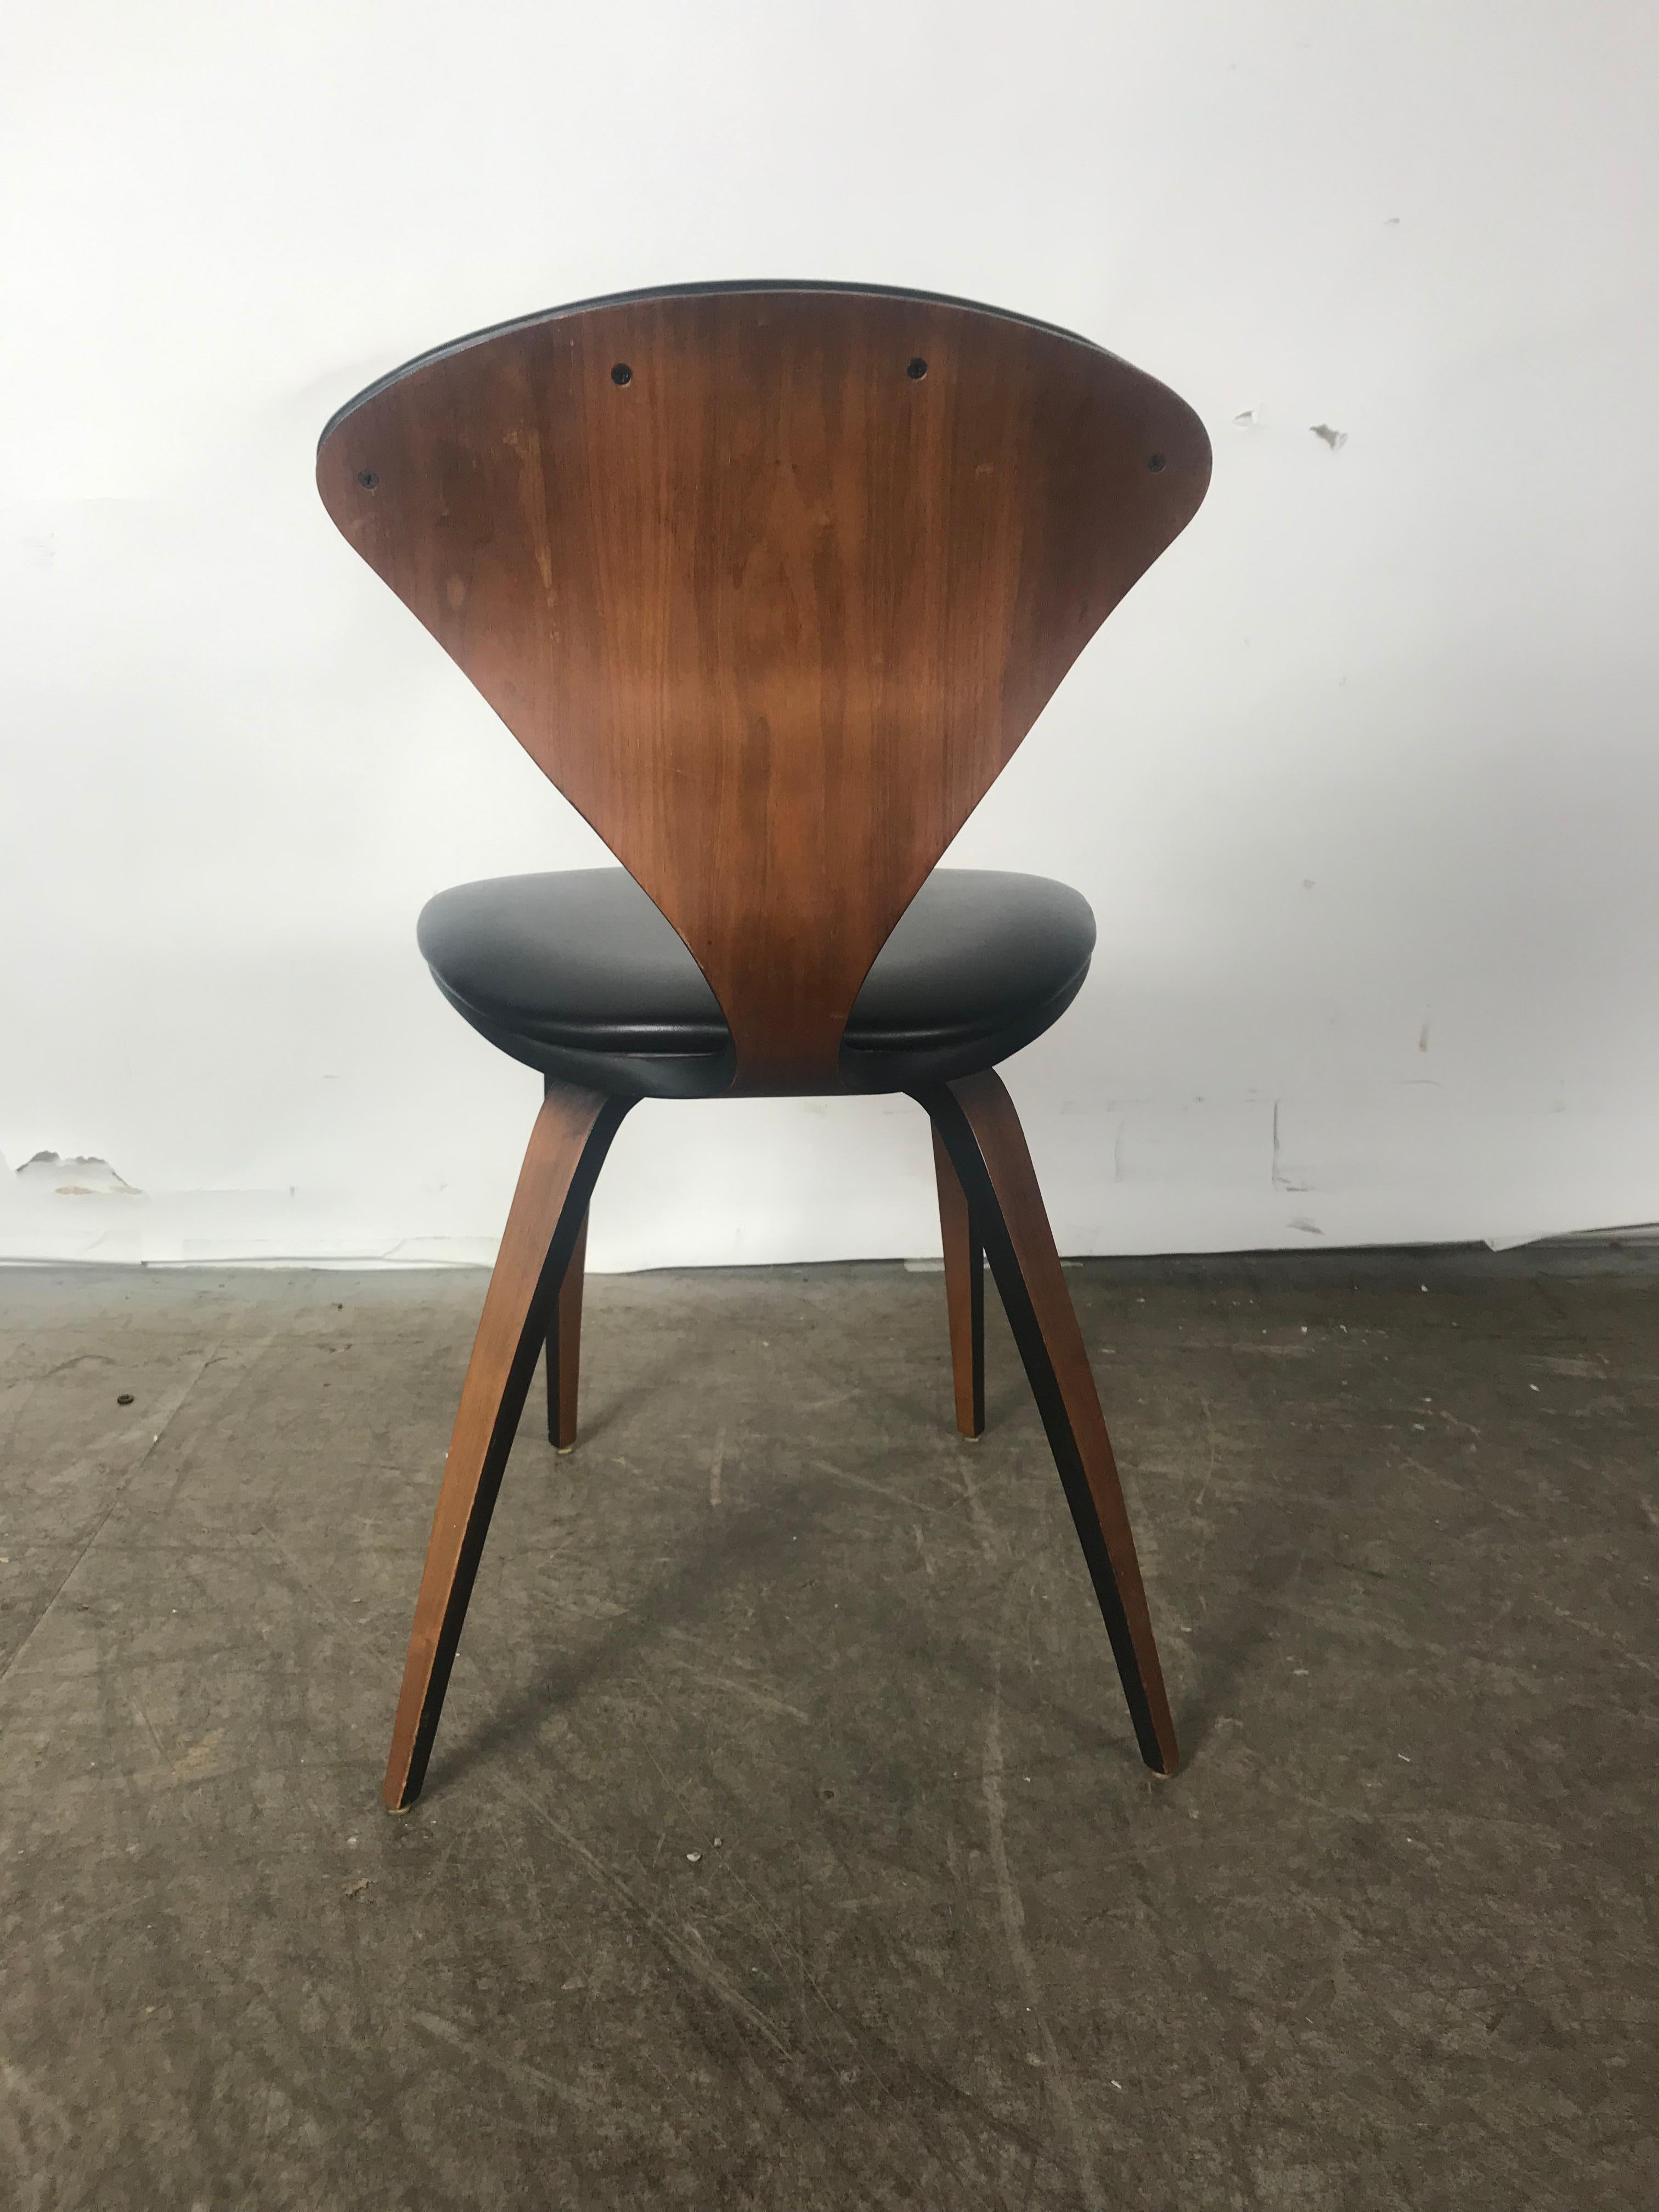 American Classic Mid-Century Modern Plywood Side Chair by Norman Cherner for Plycraft